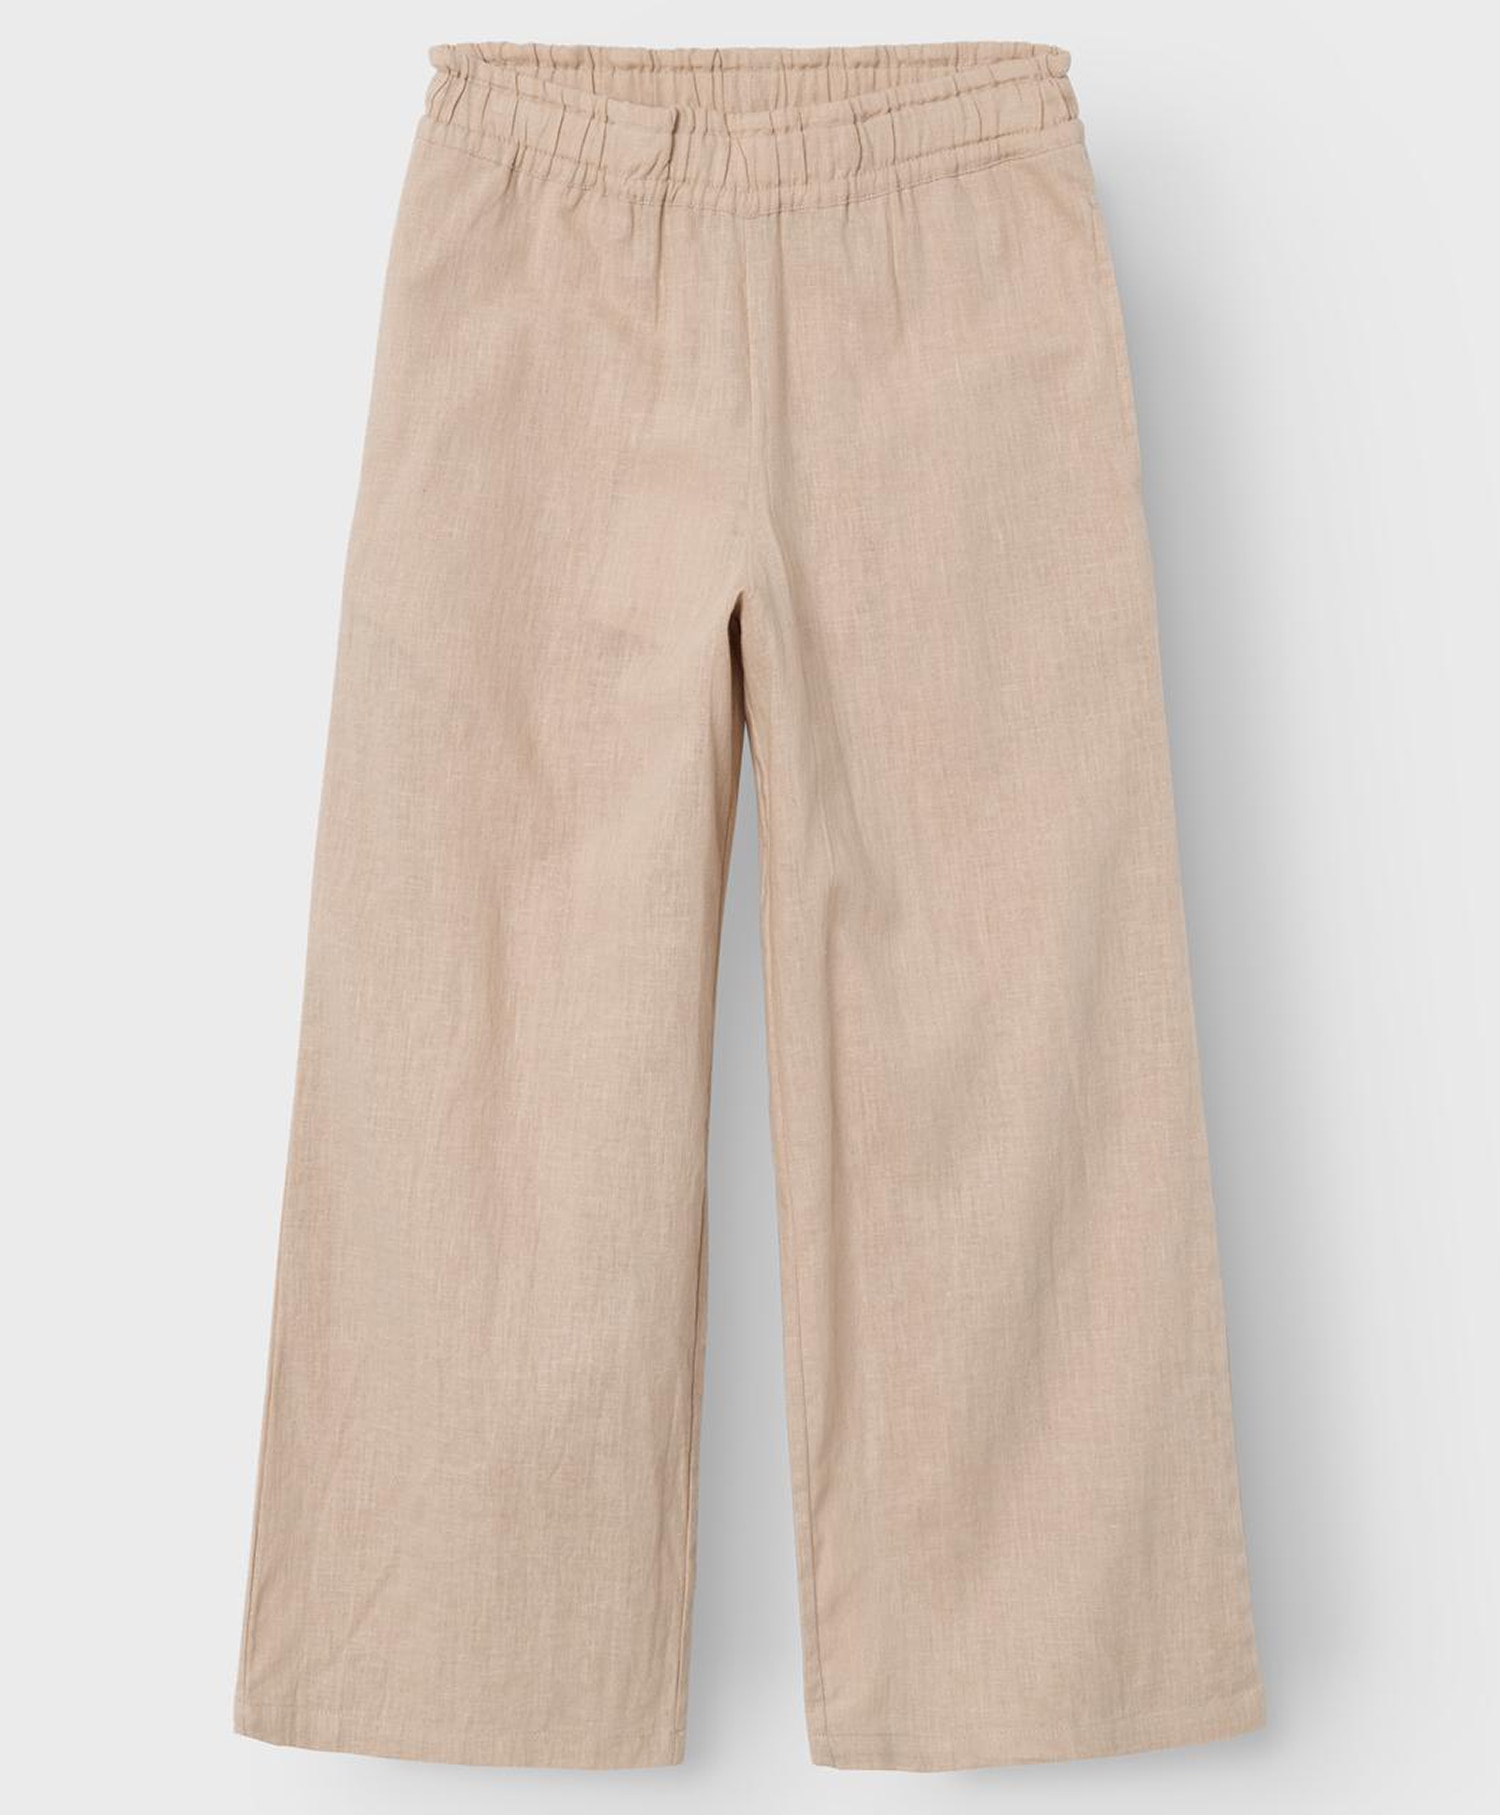 Name it Falinnen Wide pant